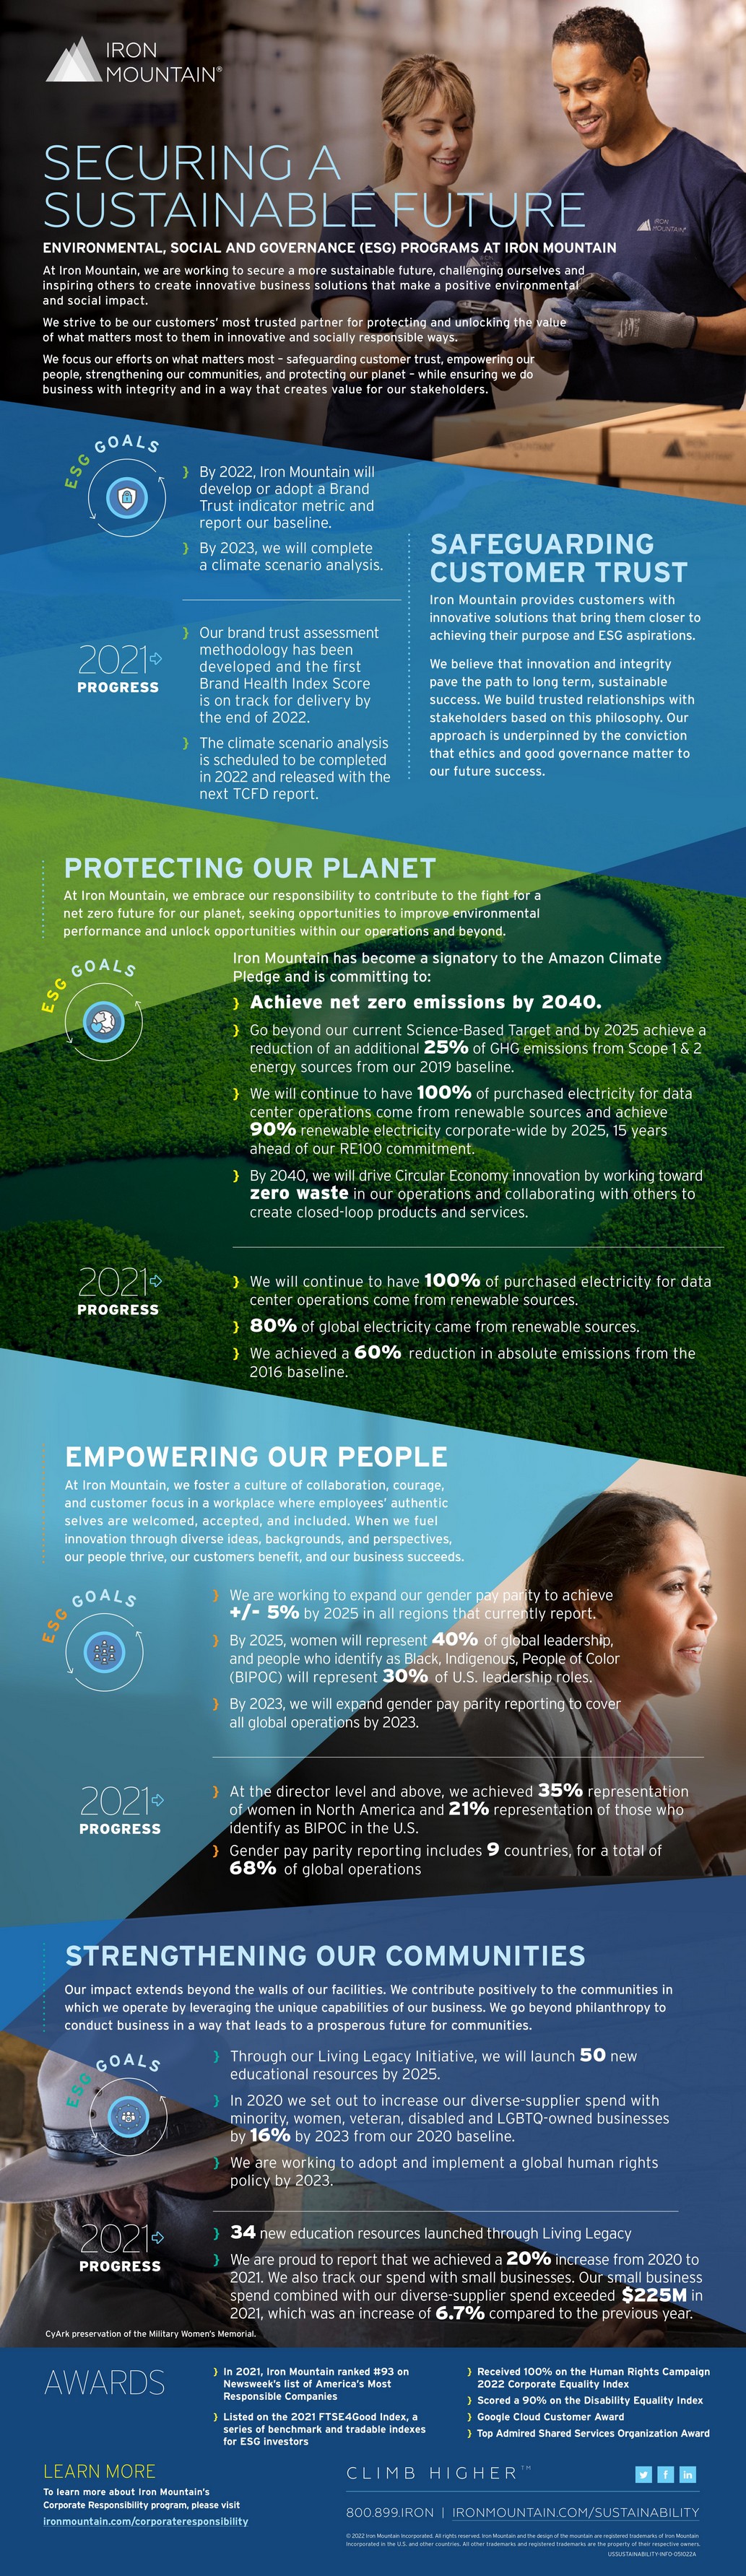 Securing a Sustainable Future Infographic